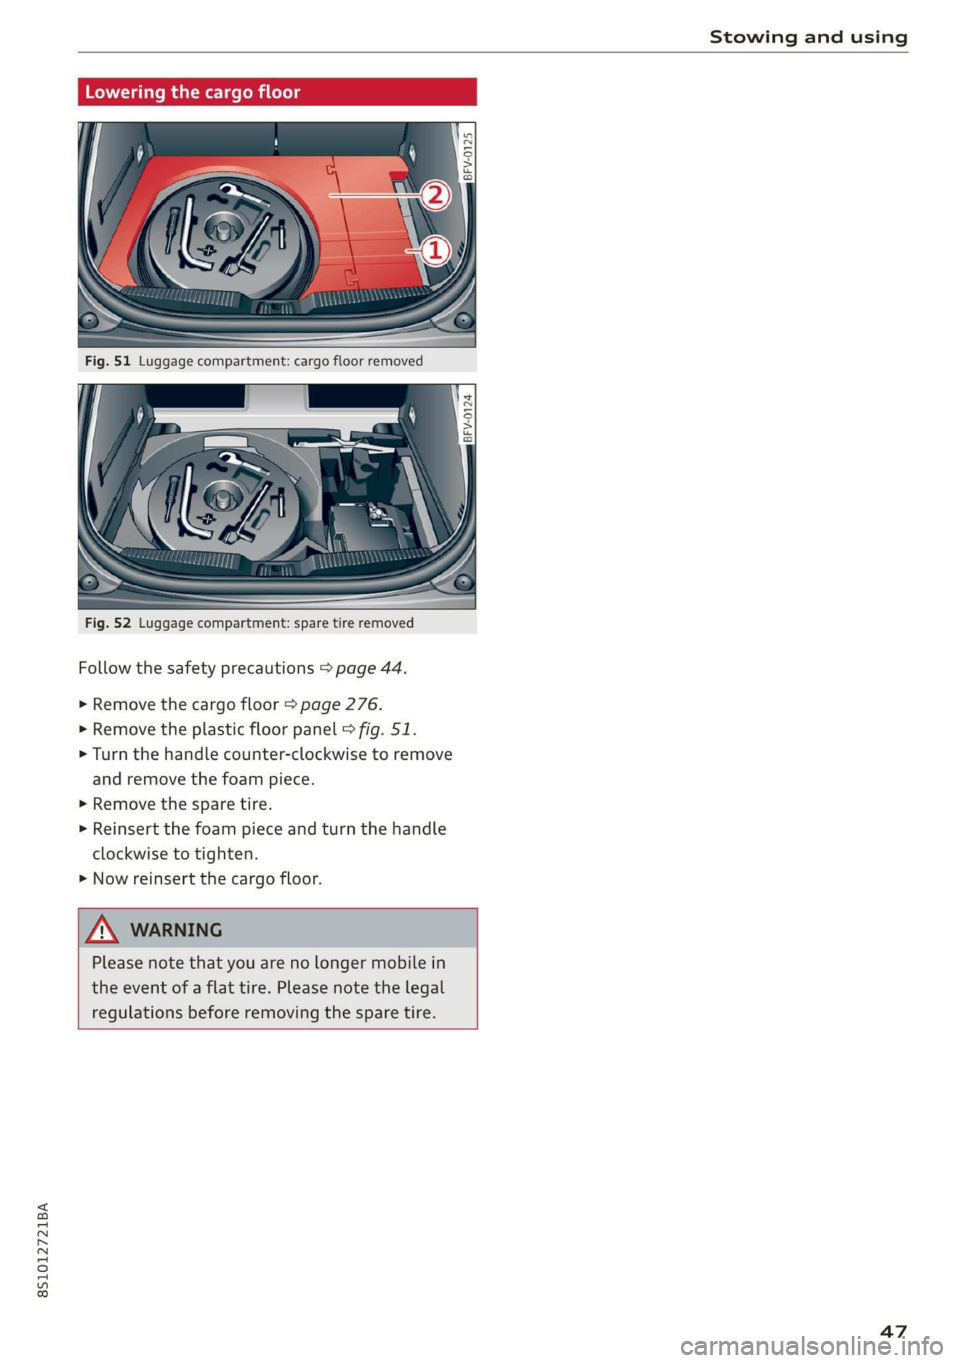 AUDI TT COUPE 2019  Owners Manual 8S1012721BA
 
Stowingandusing
 
 
Fig.52Luggagecompartment:sparetireremoved
Followthesafetyprecautions>page44.
>»Removethecargofloor>page276.
>Removetheplasticfloorpanel>fig.51.
>Turn thehandlecounte